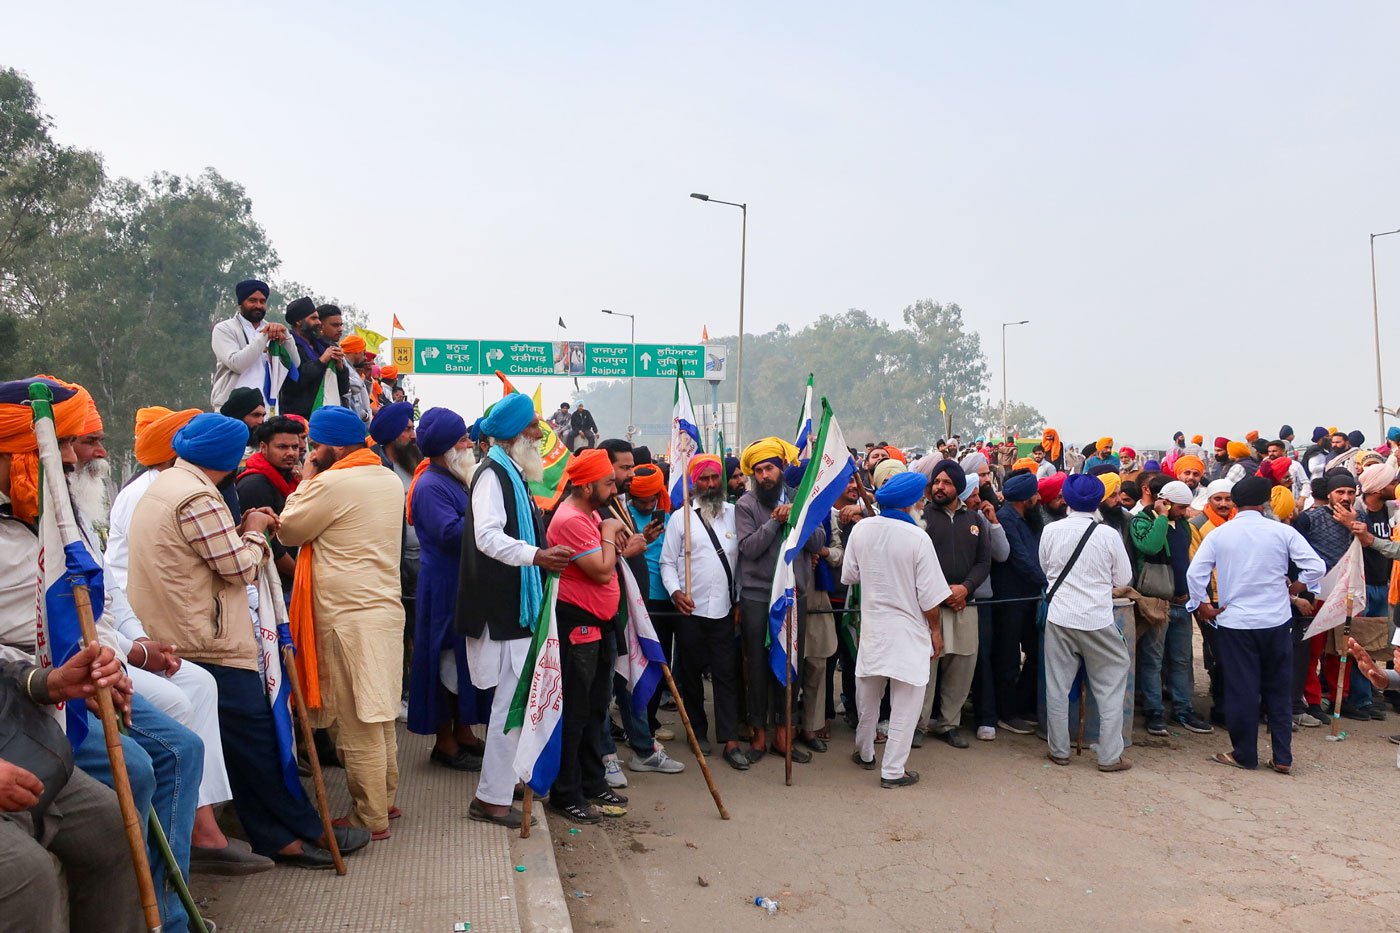 Protesters reciting satnam waheguru in front of the barricades